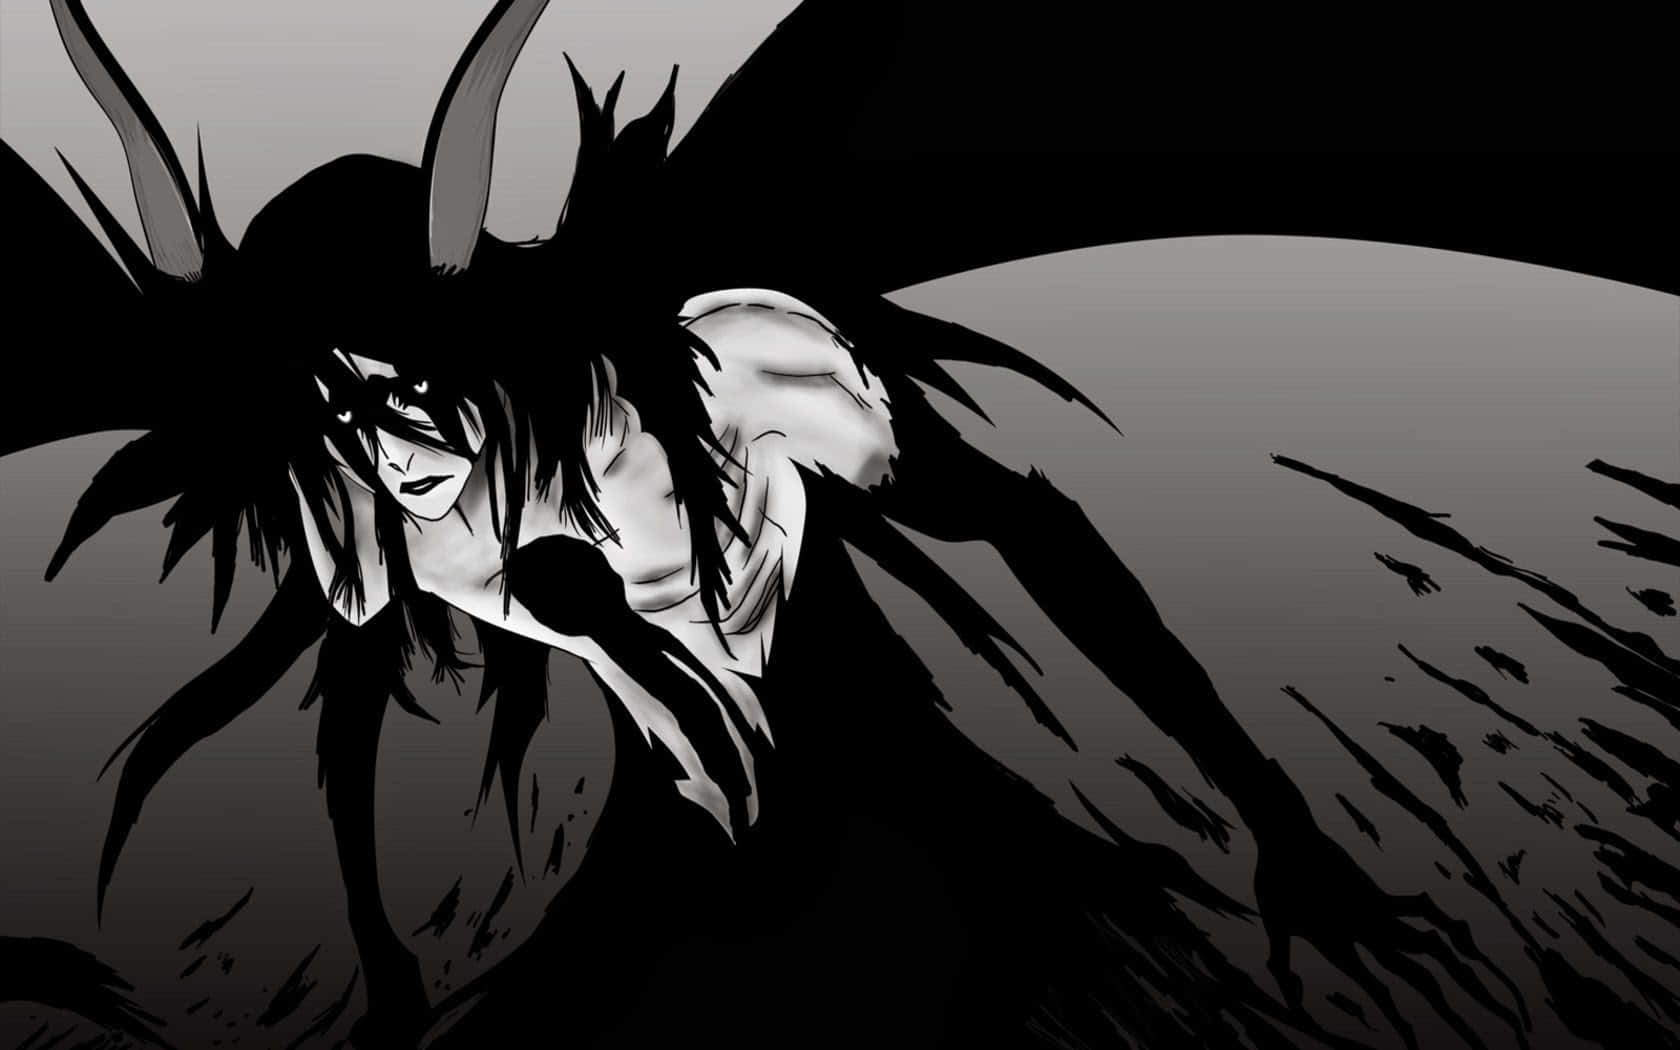 Ulquiorra Cifer, a powerful Arrancar and one of the main characters of the Bleach anime series Wallpaper